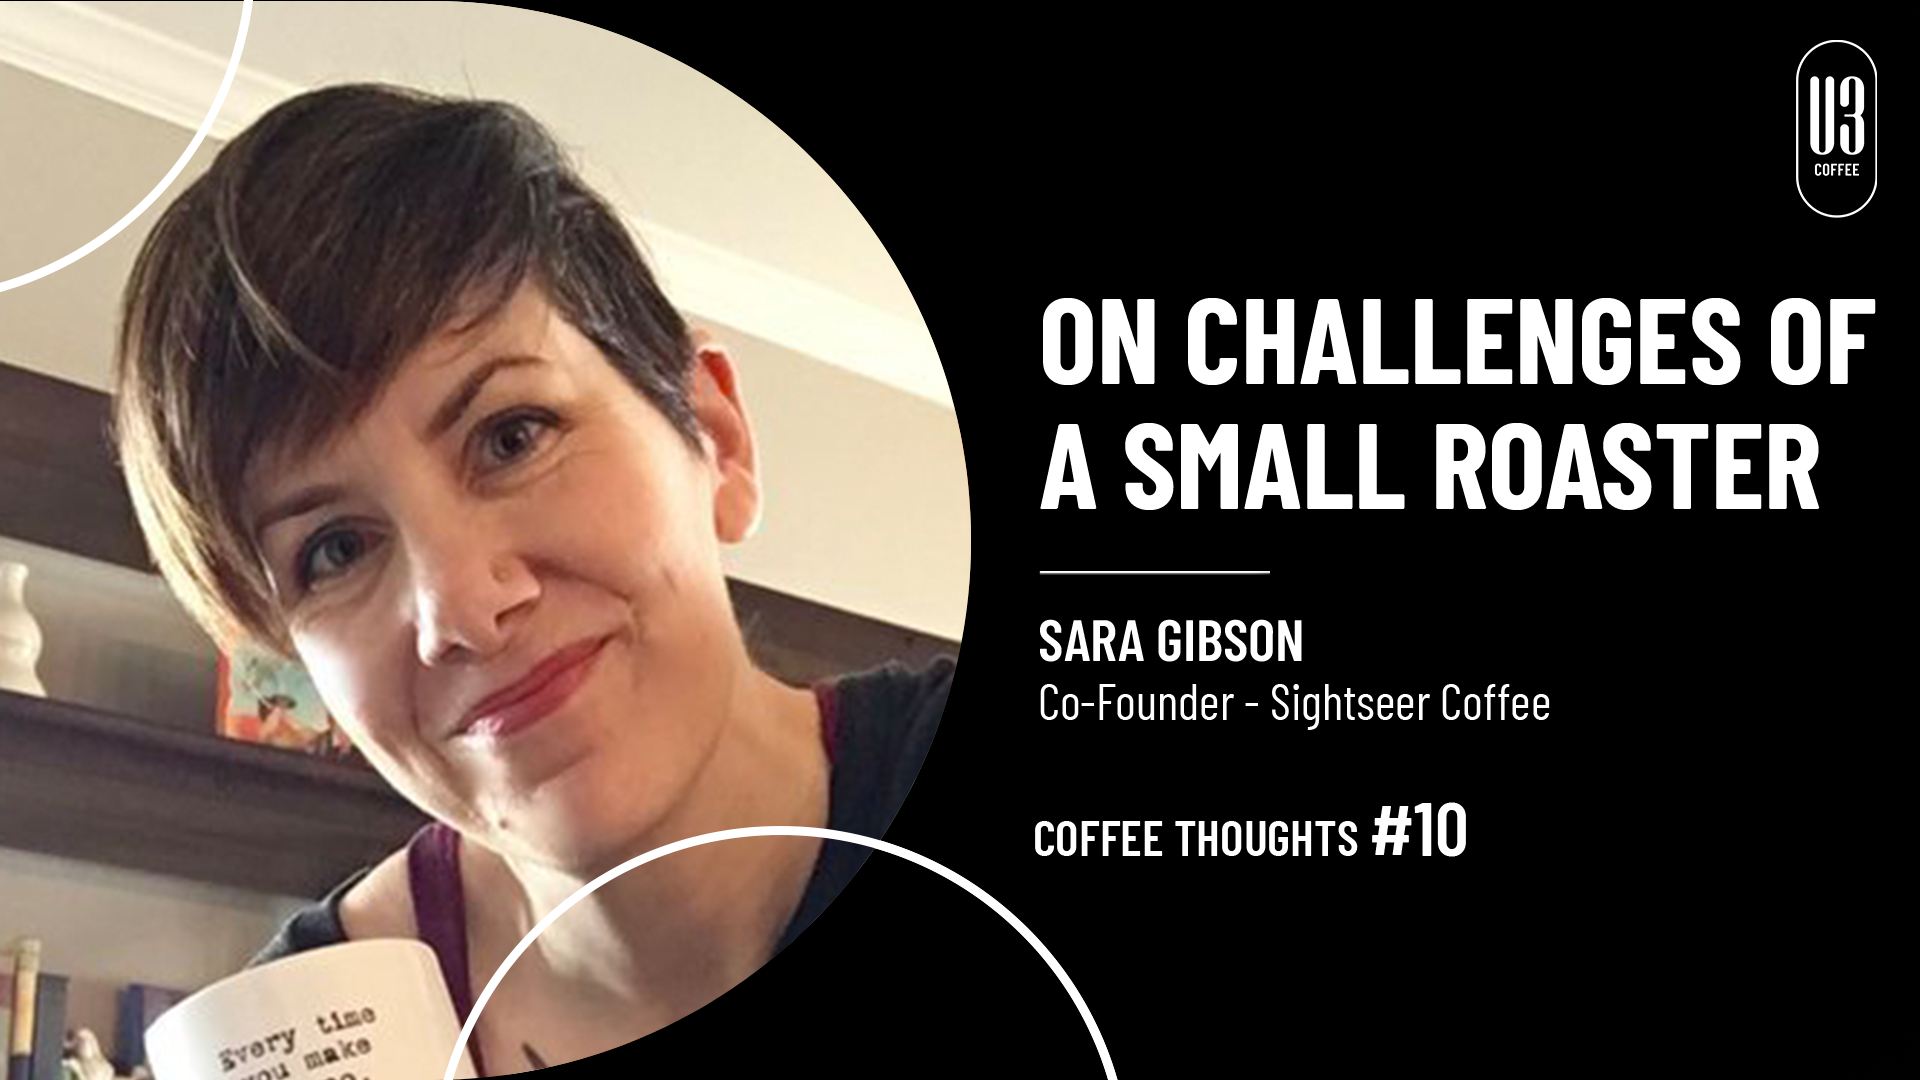 #10 Coffee Thoughts: Sara Gibson, Co-Founder of Sightseer Coffee gives her thoughts on the challenges of a small roaster. Brought to you by U3 Coffee.